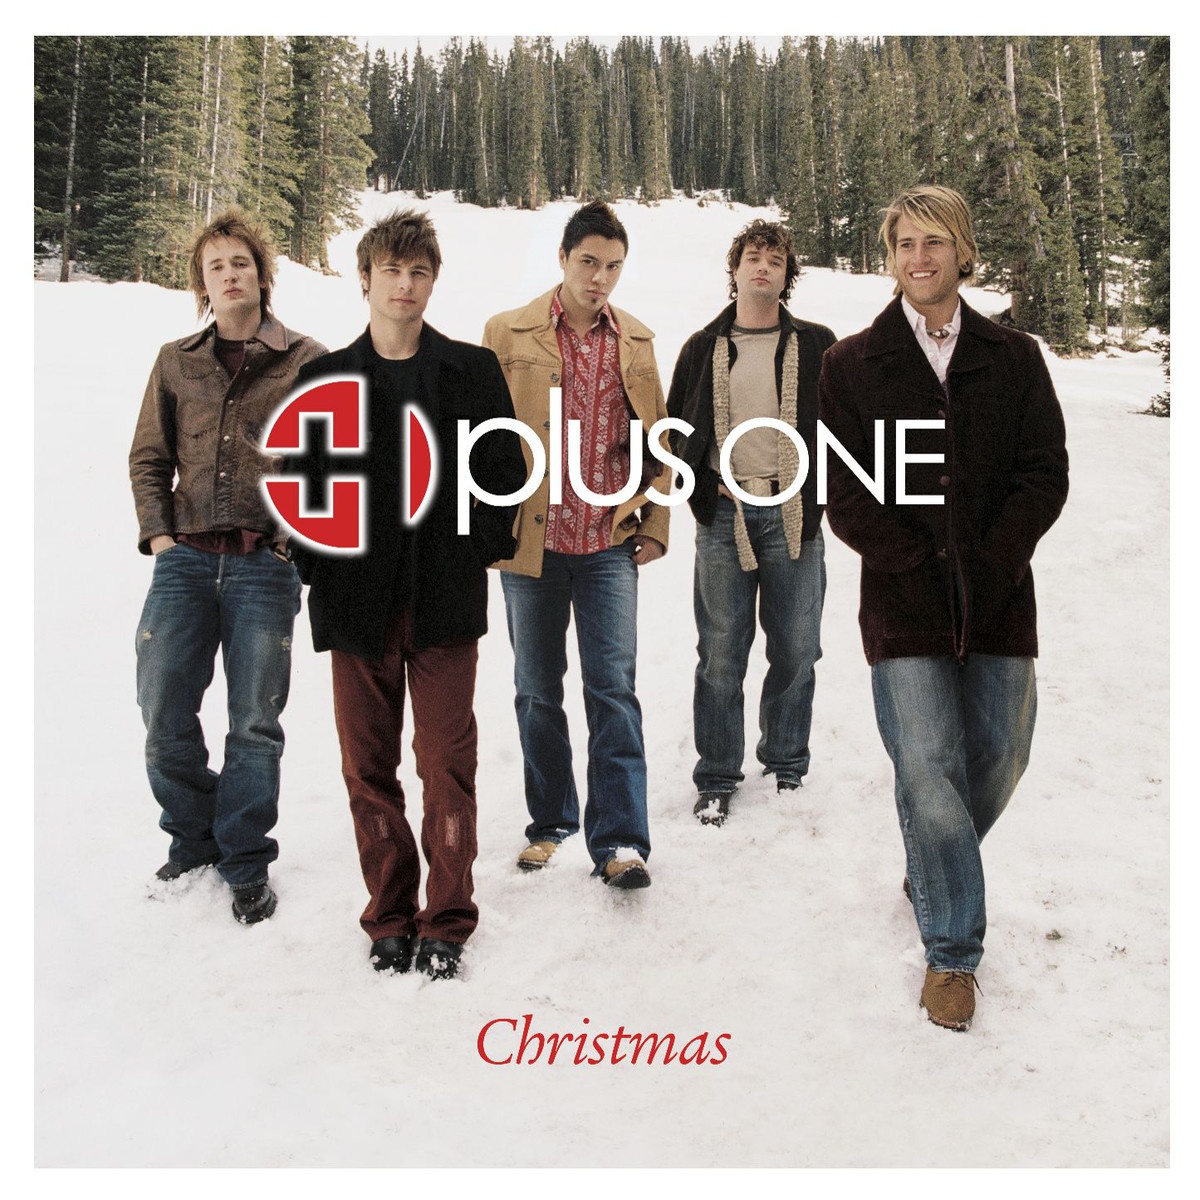 The Medley: Have Yourself A Merry Little Christmas/I'll Be Home For Christmas/O Come Let Us Adore Him (Album Version)